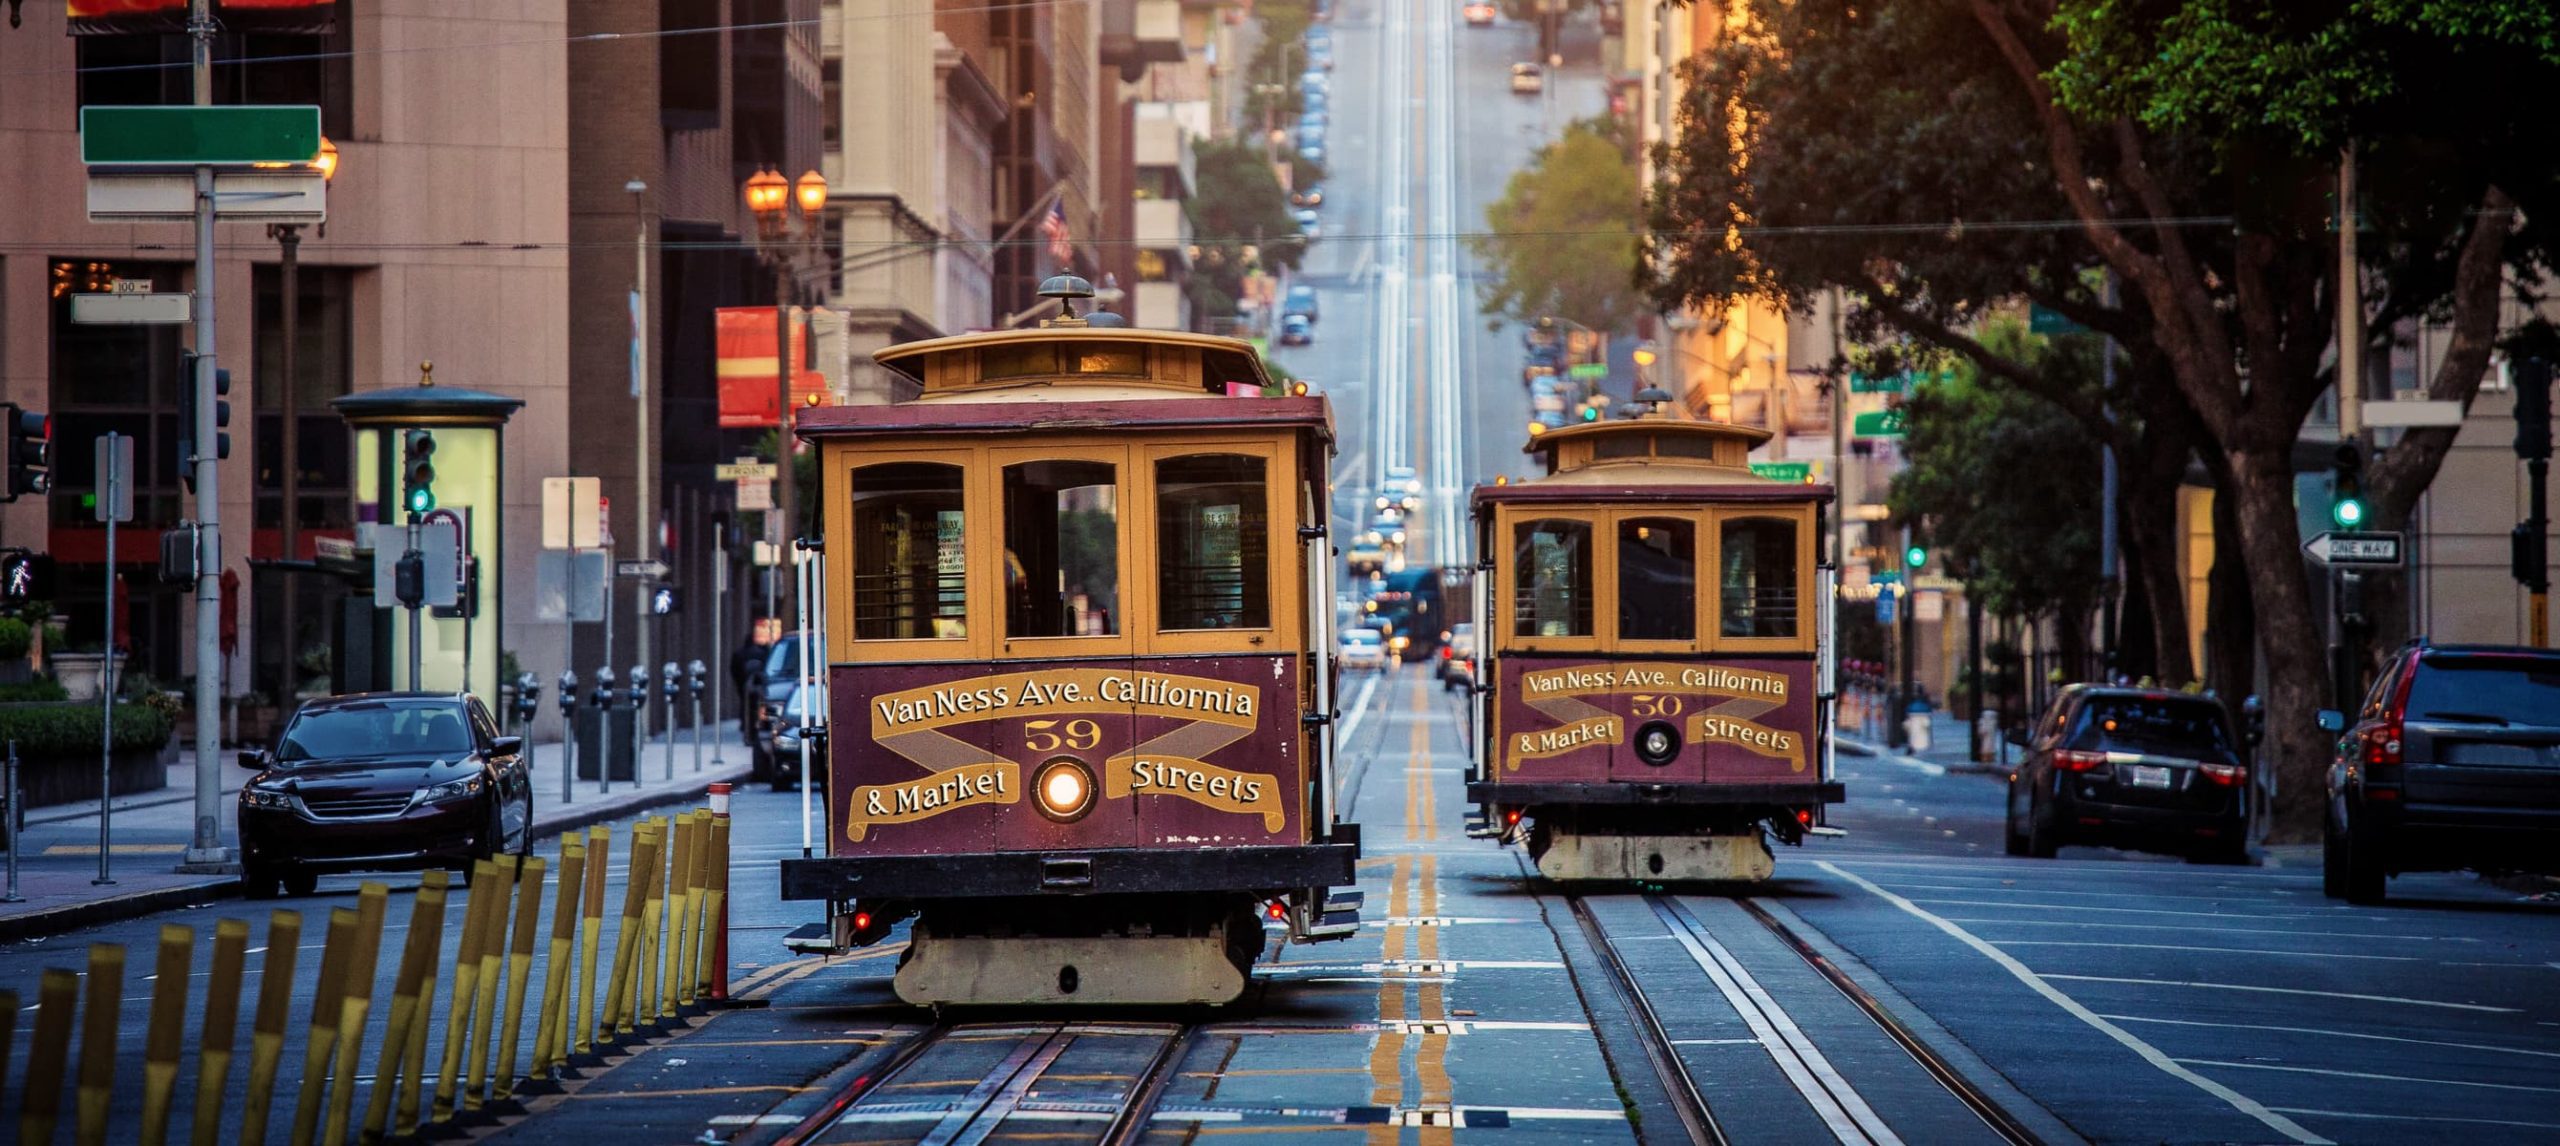 Two cable cars passing through California Street, in San Francisco, California.